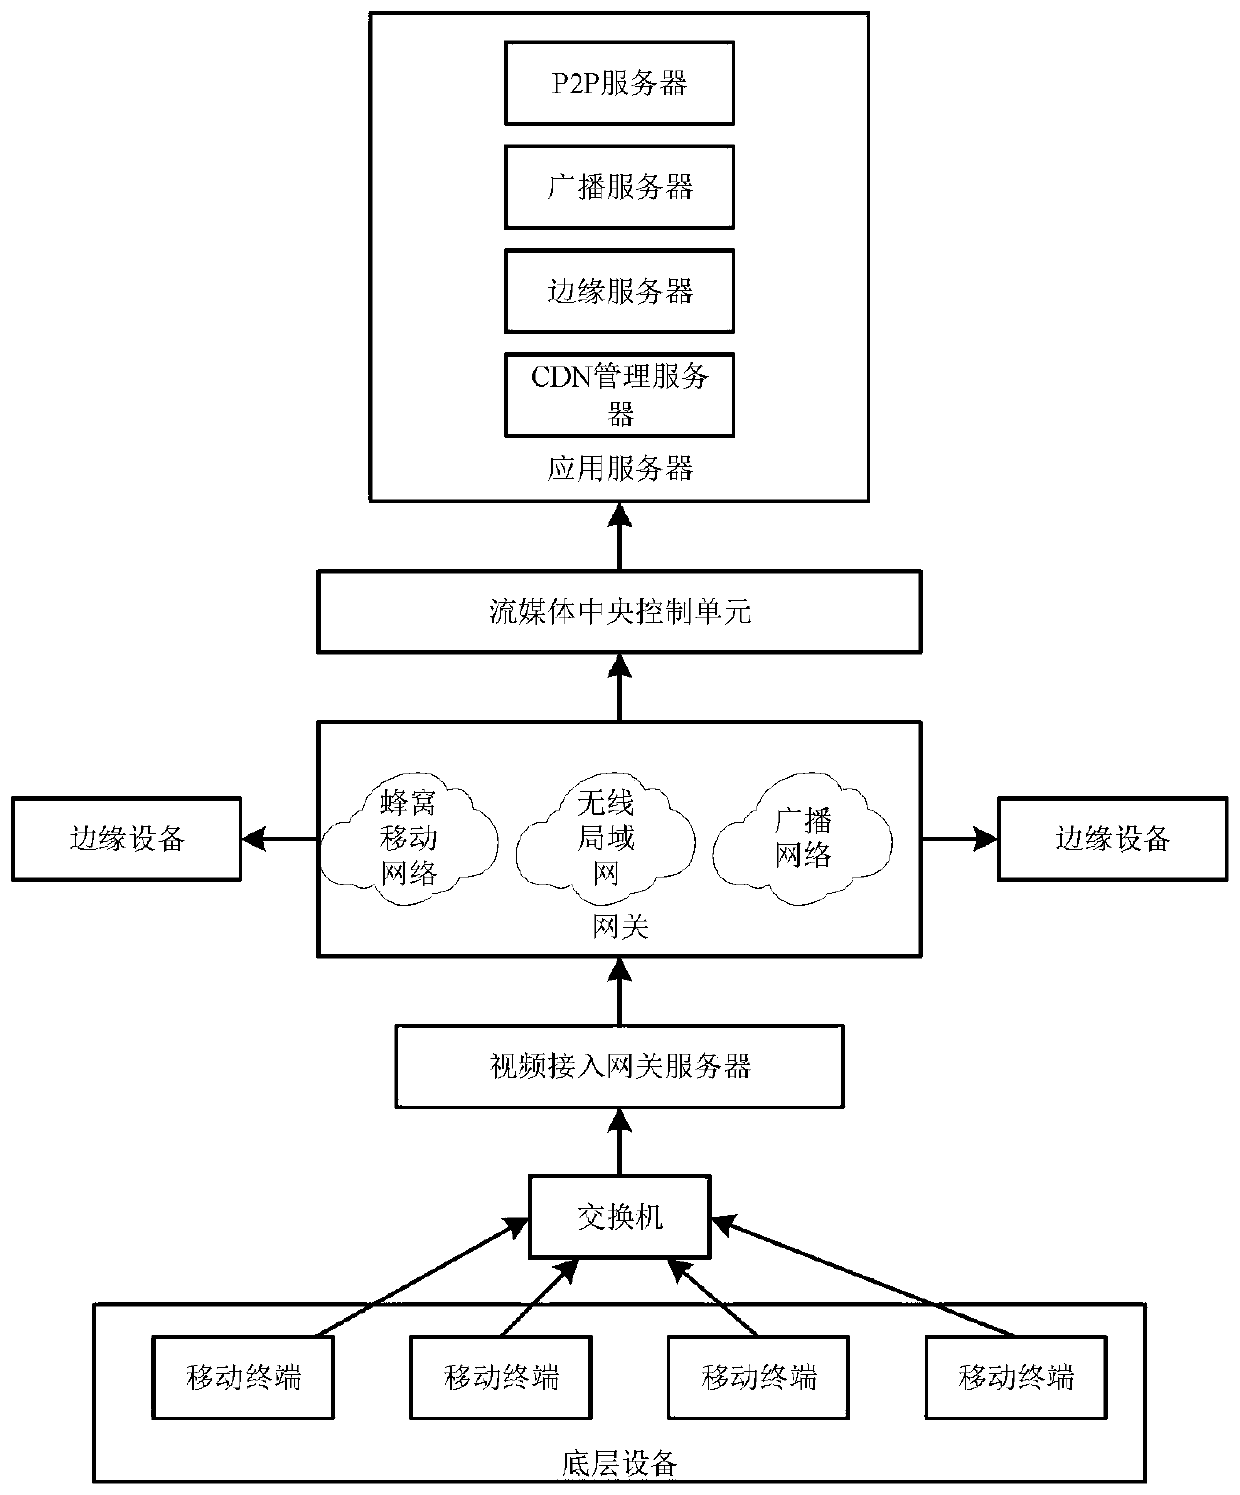 Multi-streaming media fusion gateway system and implementation method thereof